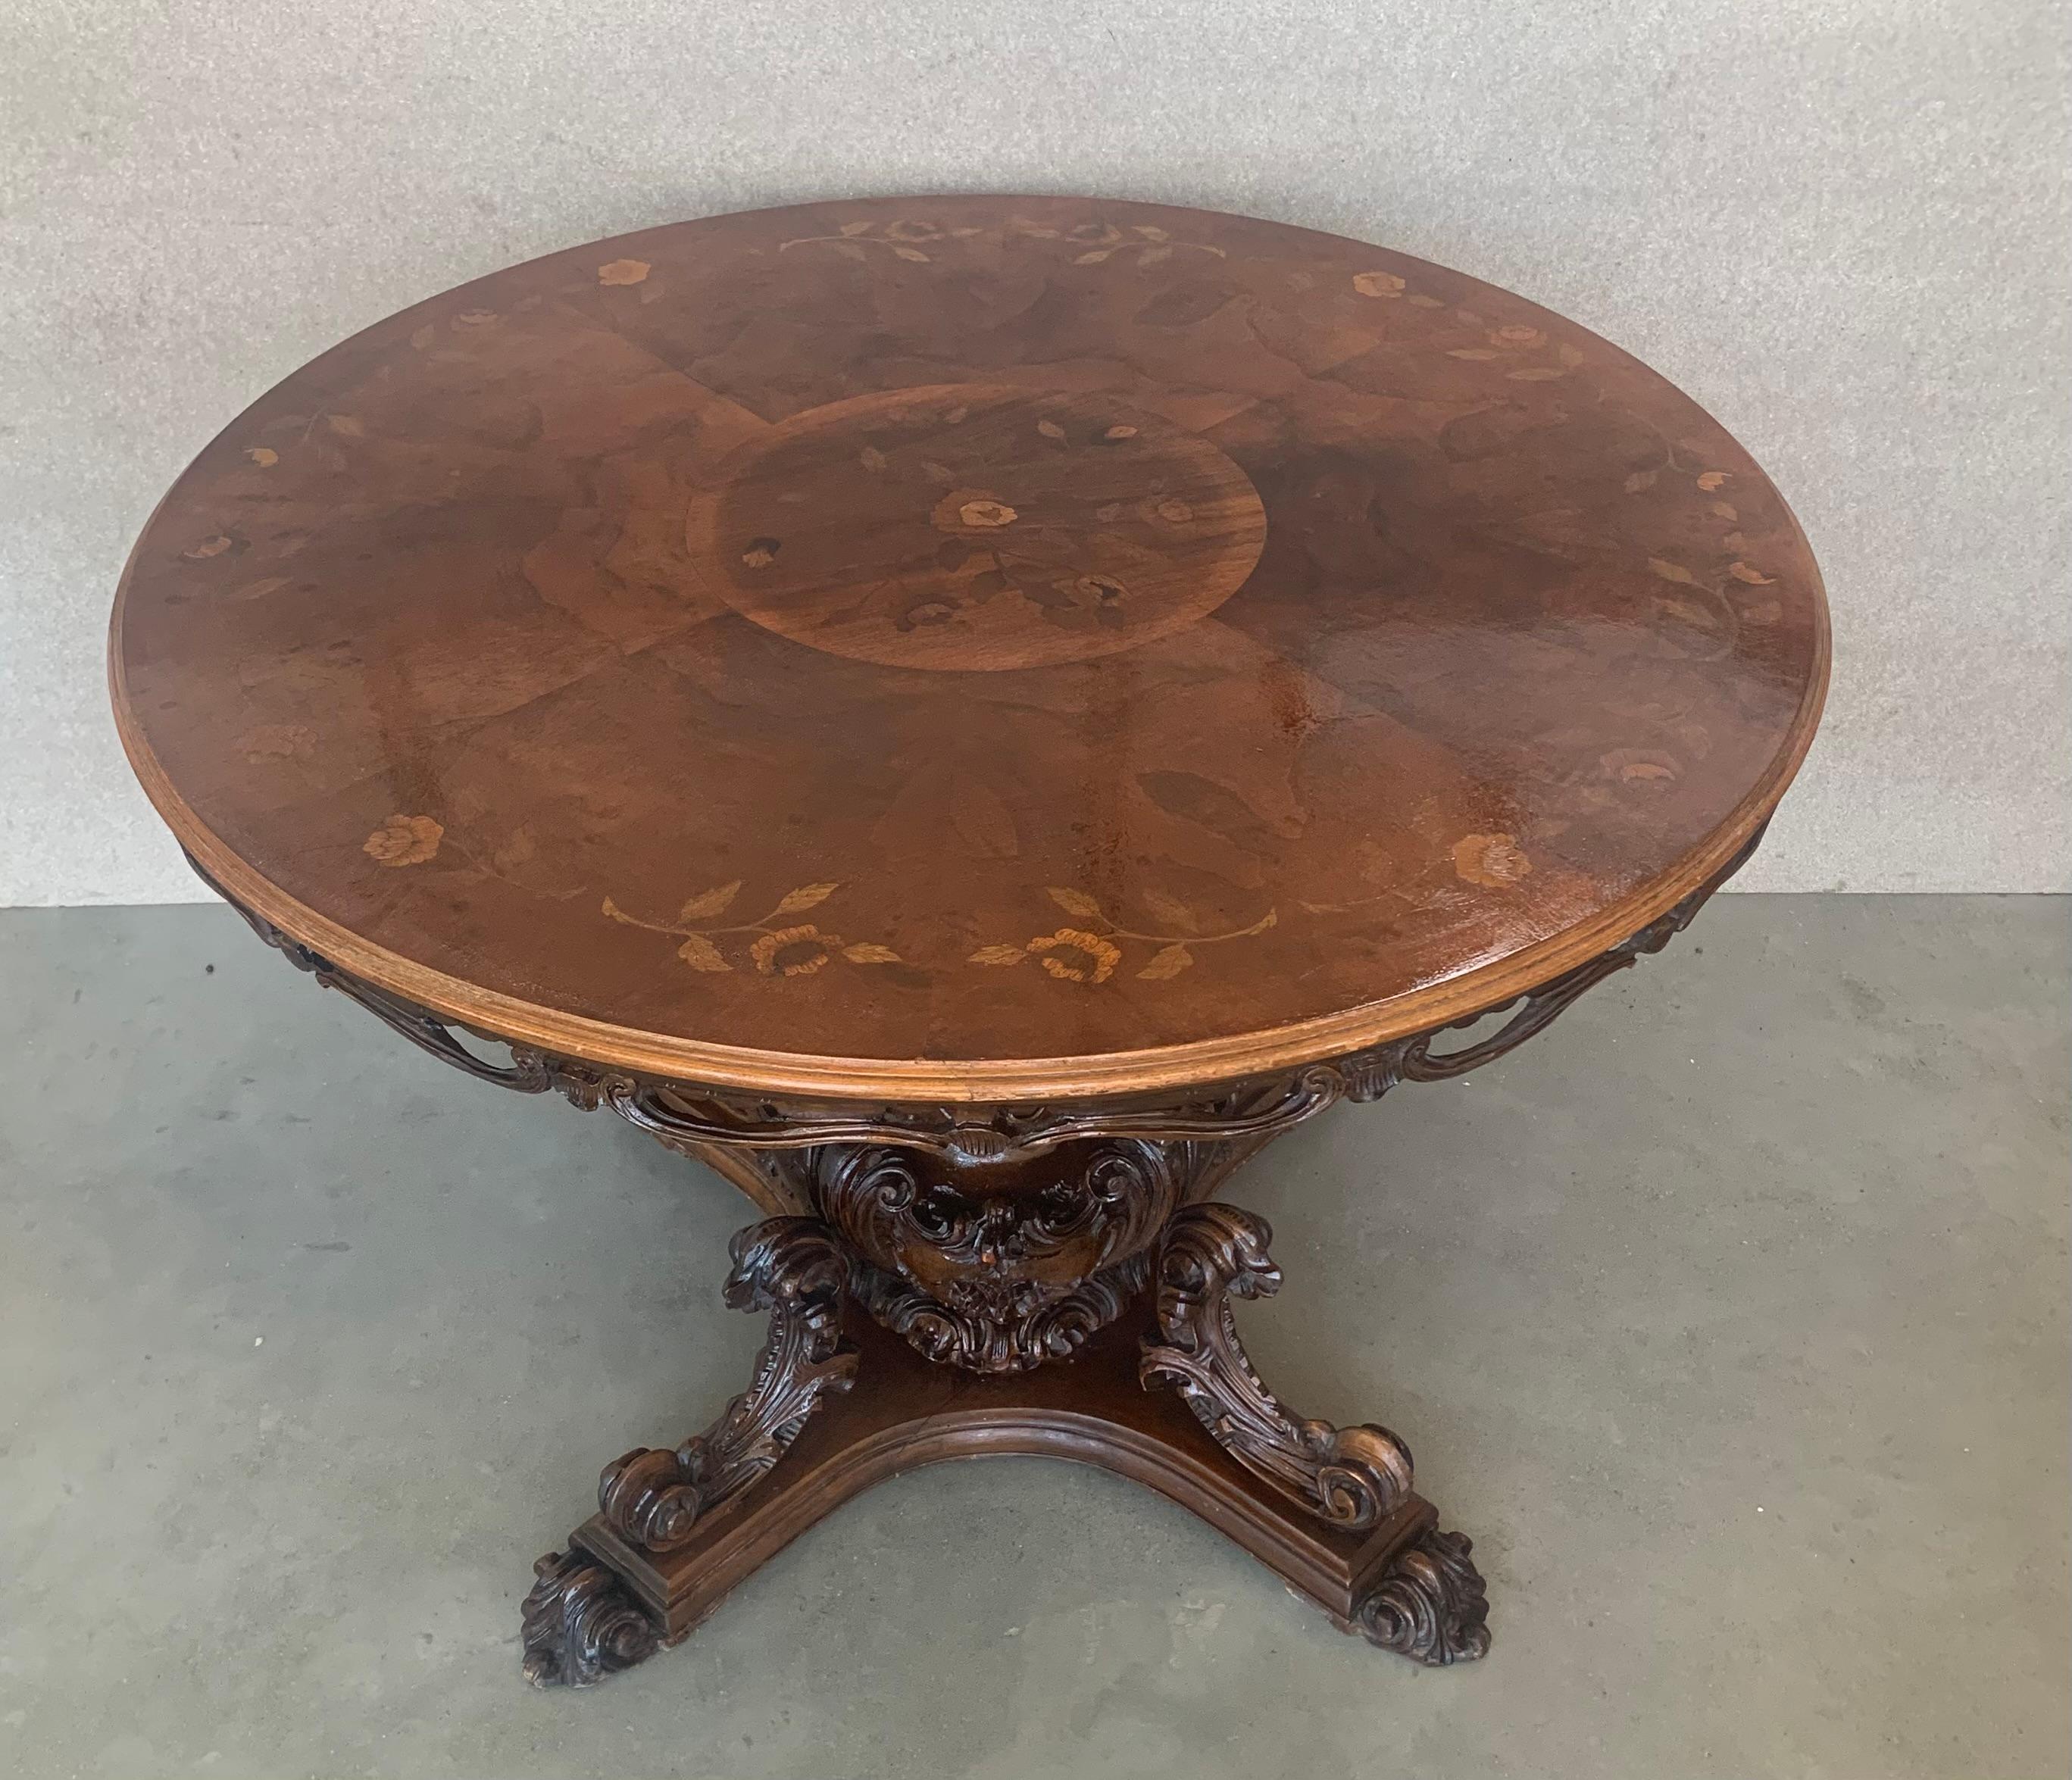 19th Century English Regency Round Table with Carved Center Pedestal in Mahogany, circa 1825